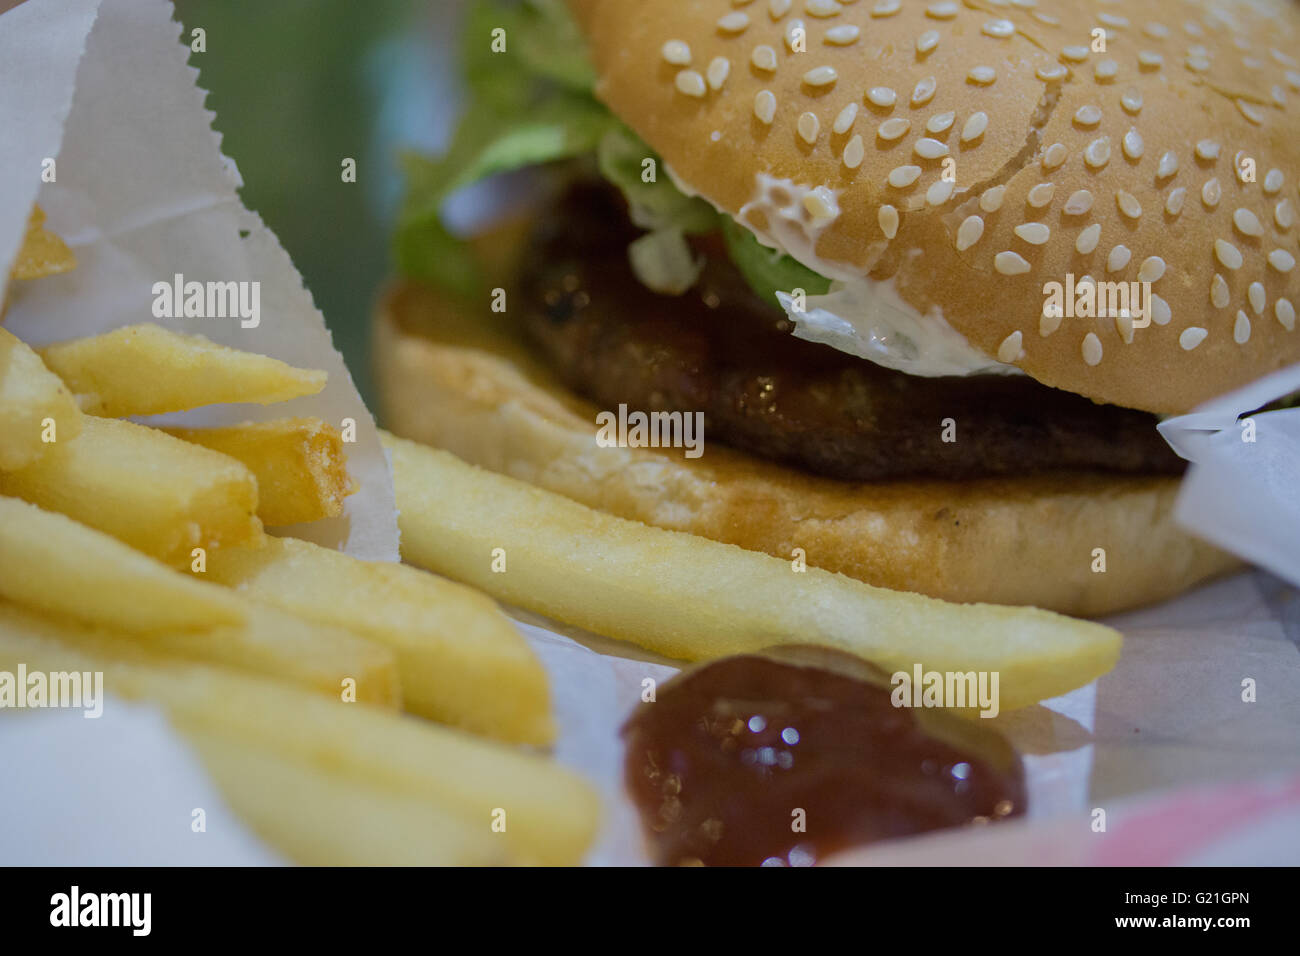 Burger meal accompanied  with fries and tomato ketchup. Stock Photo